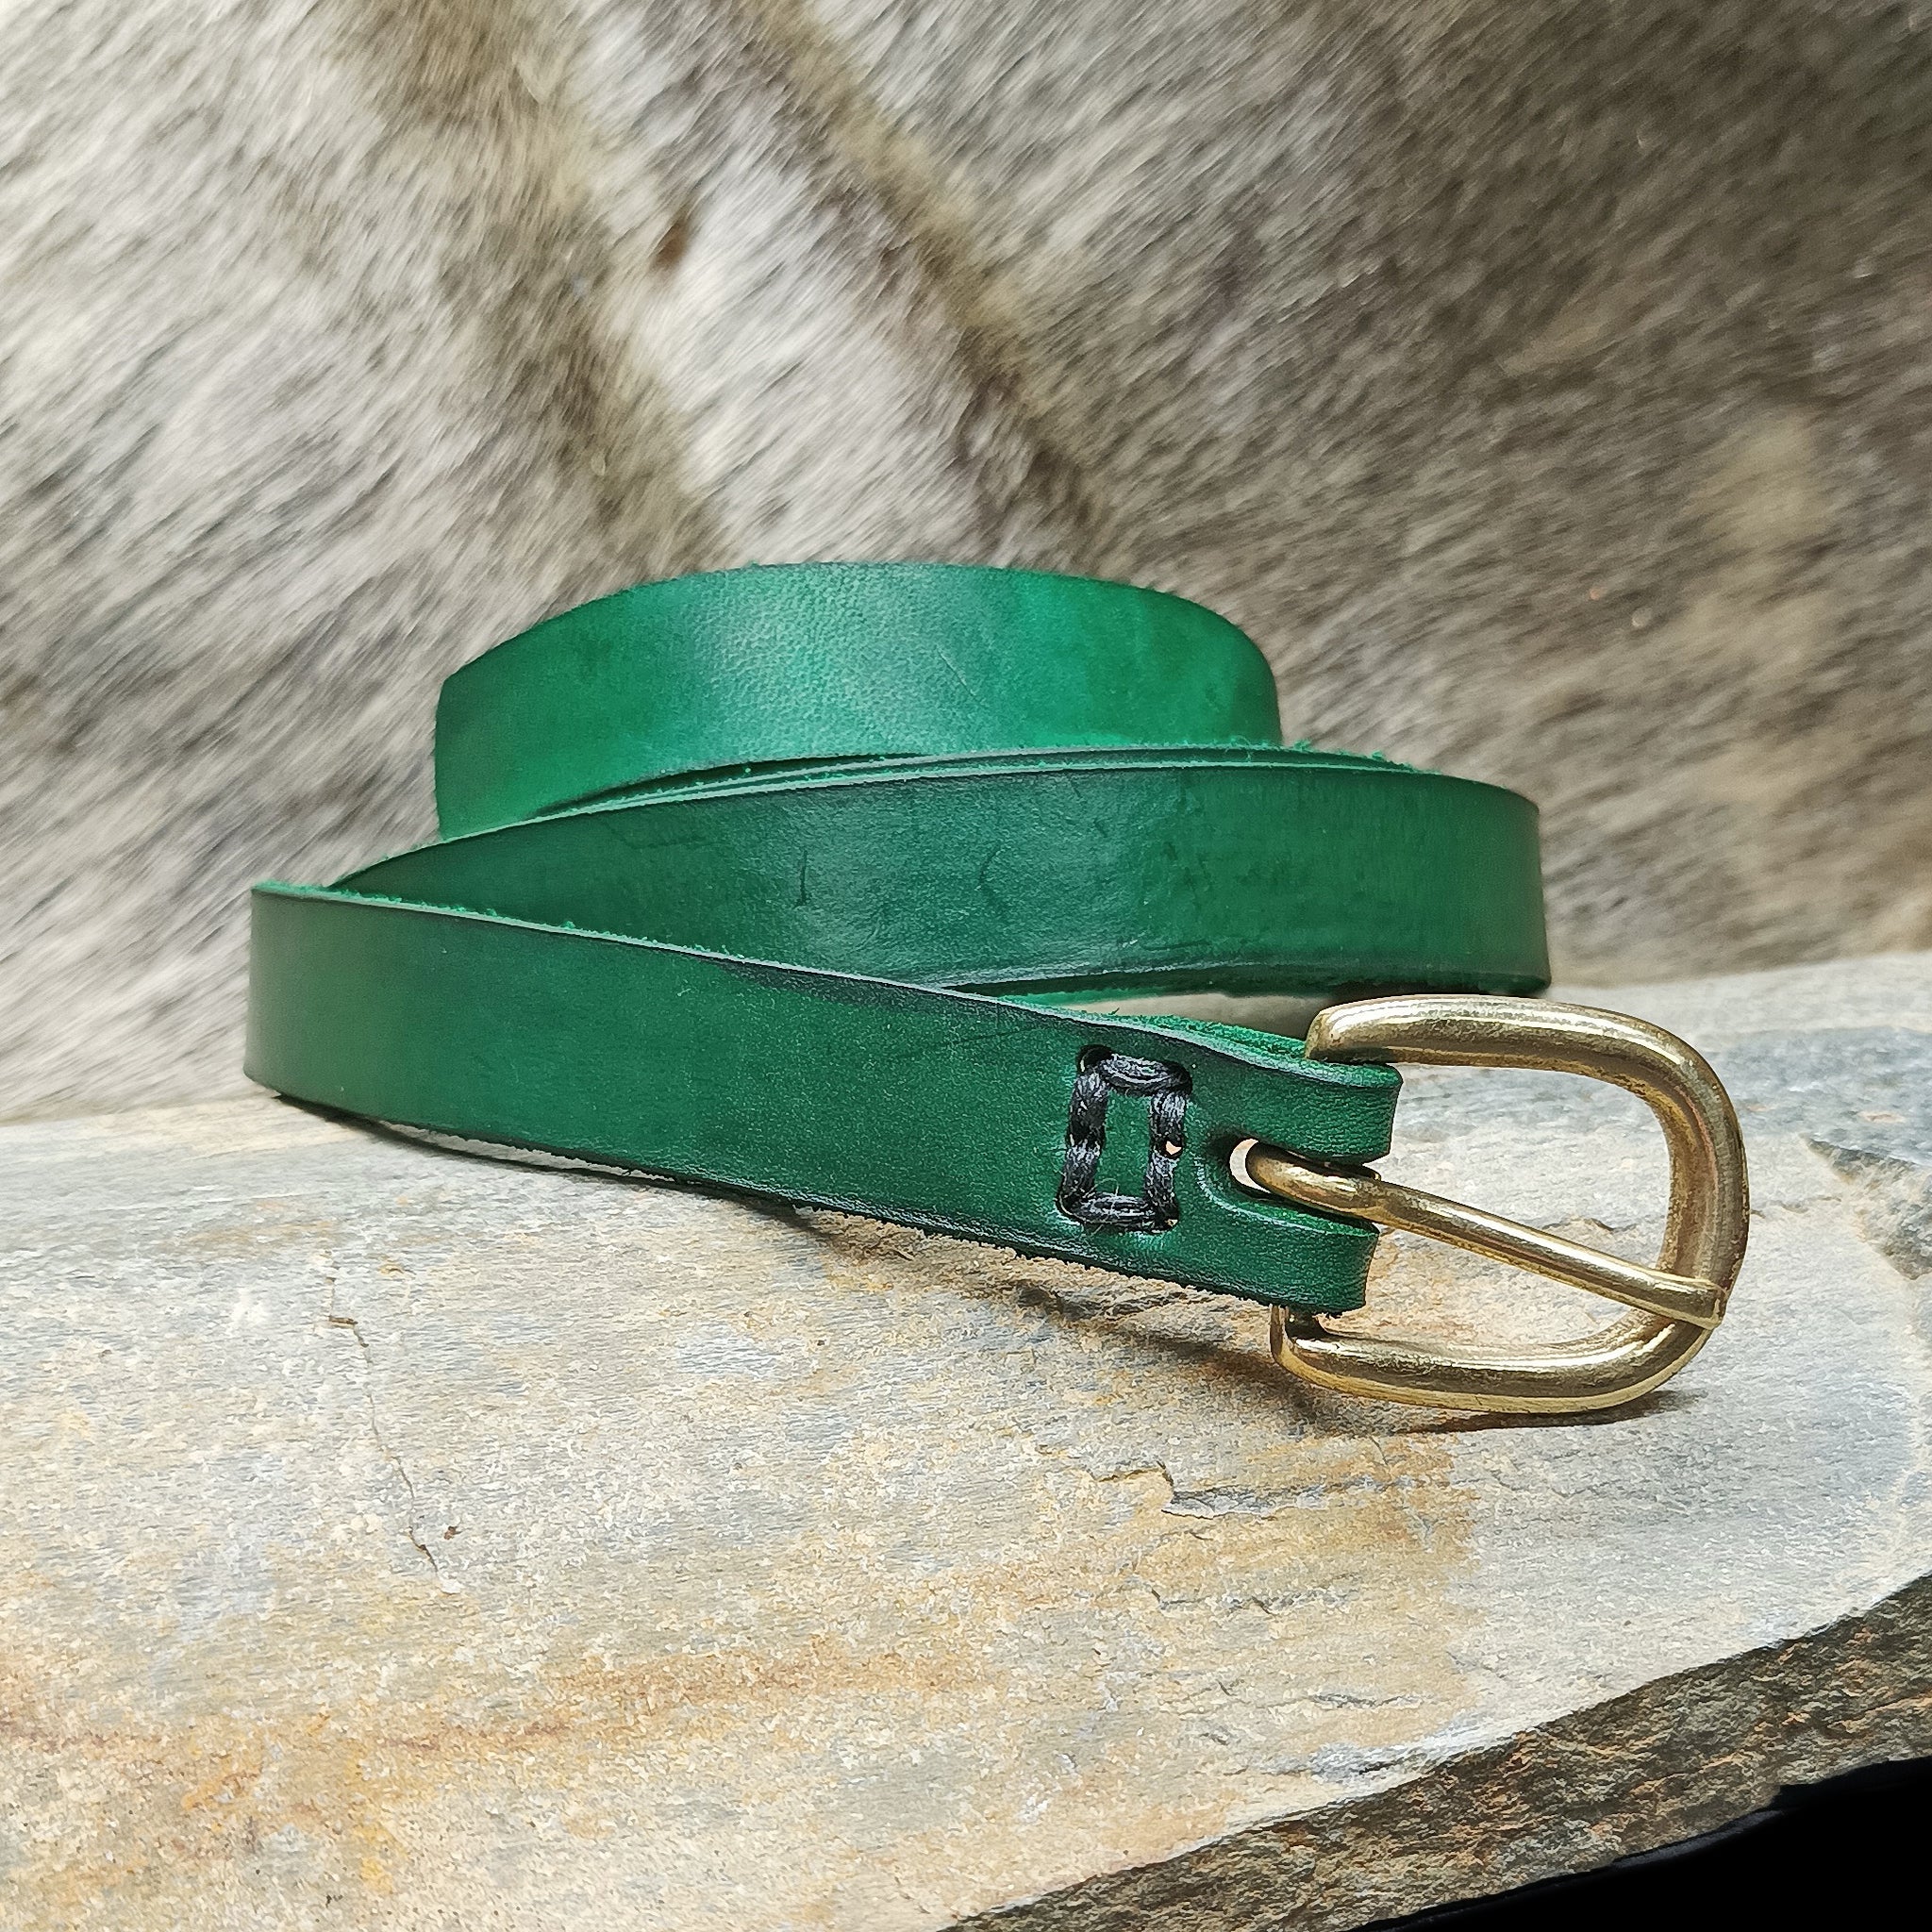 19mm Wide Leather Viking Belt with Brass Buckle - Green